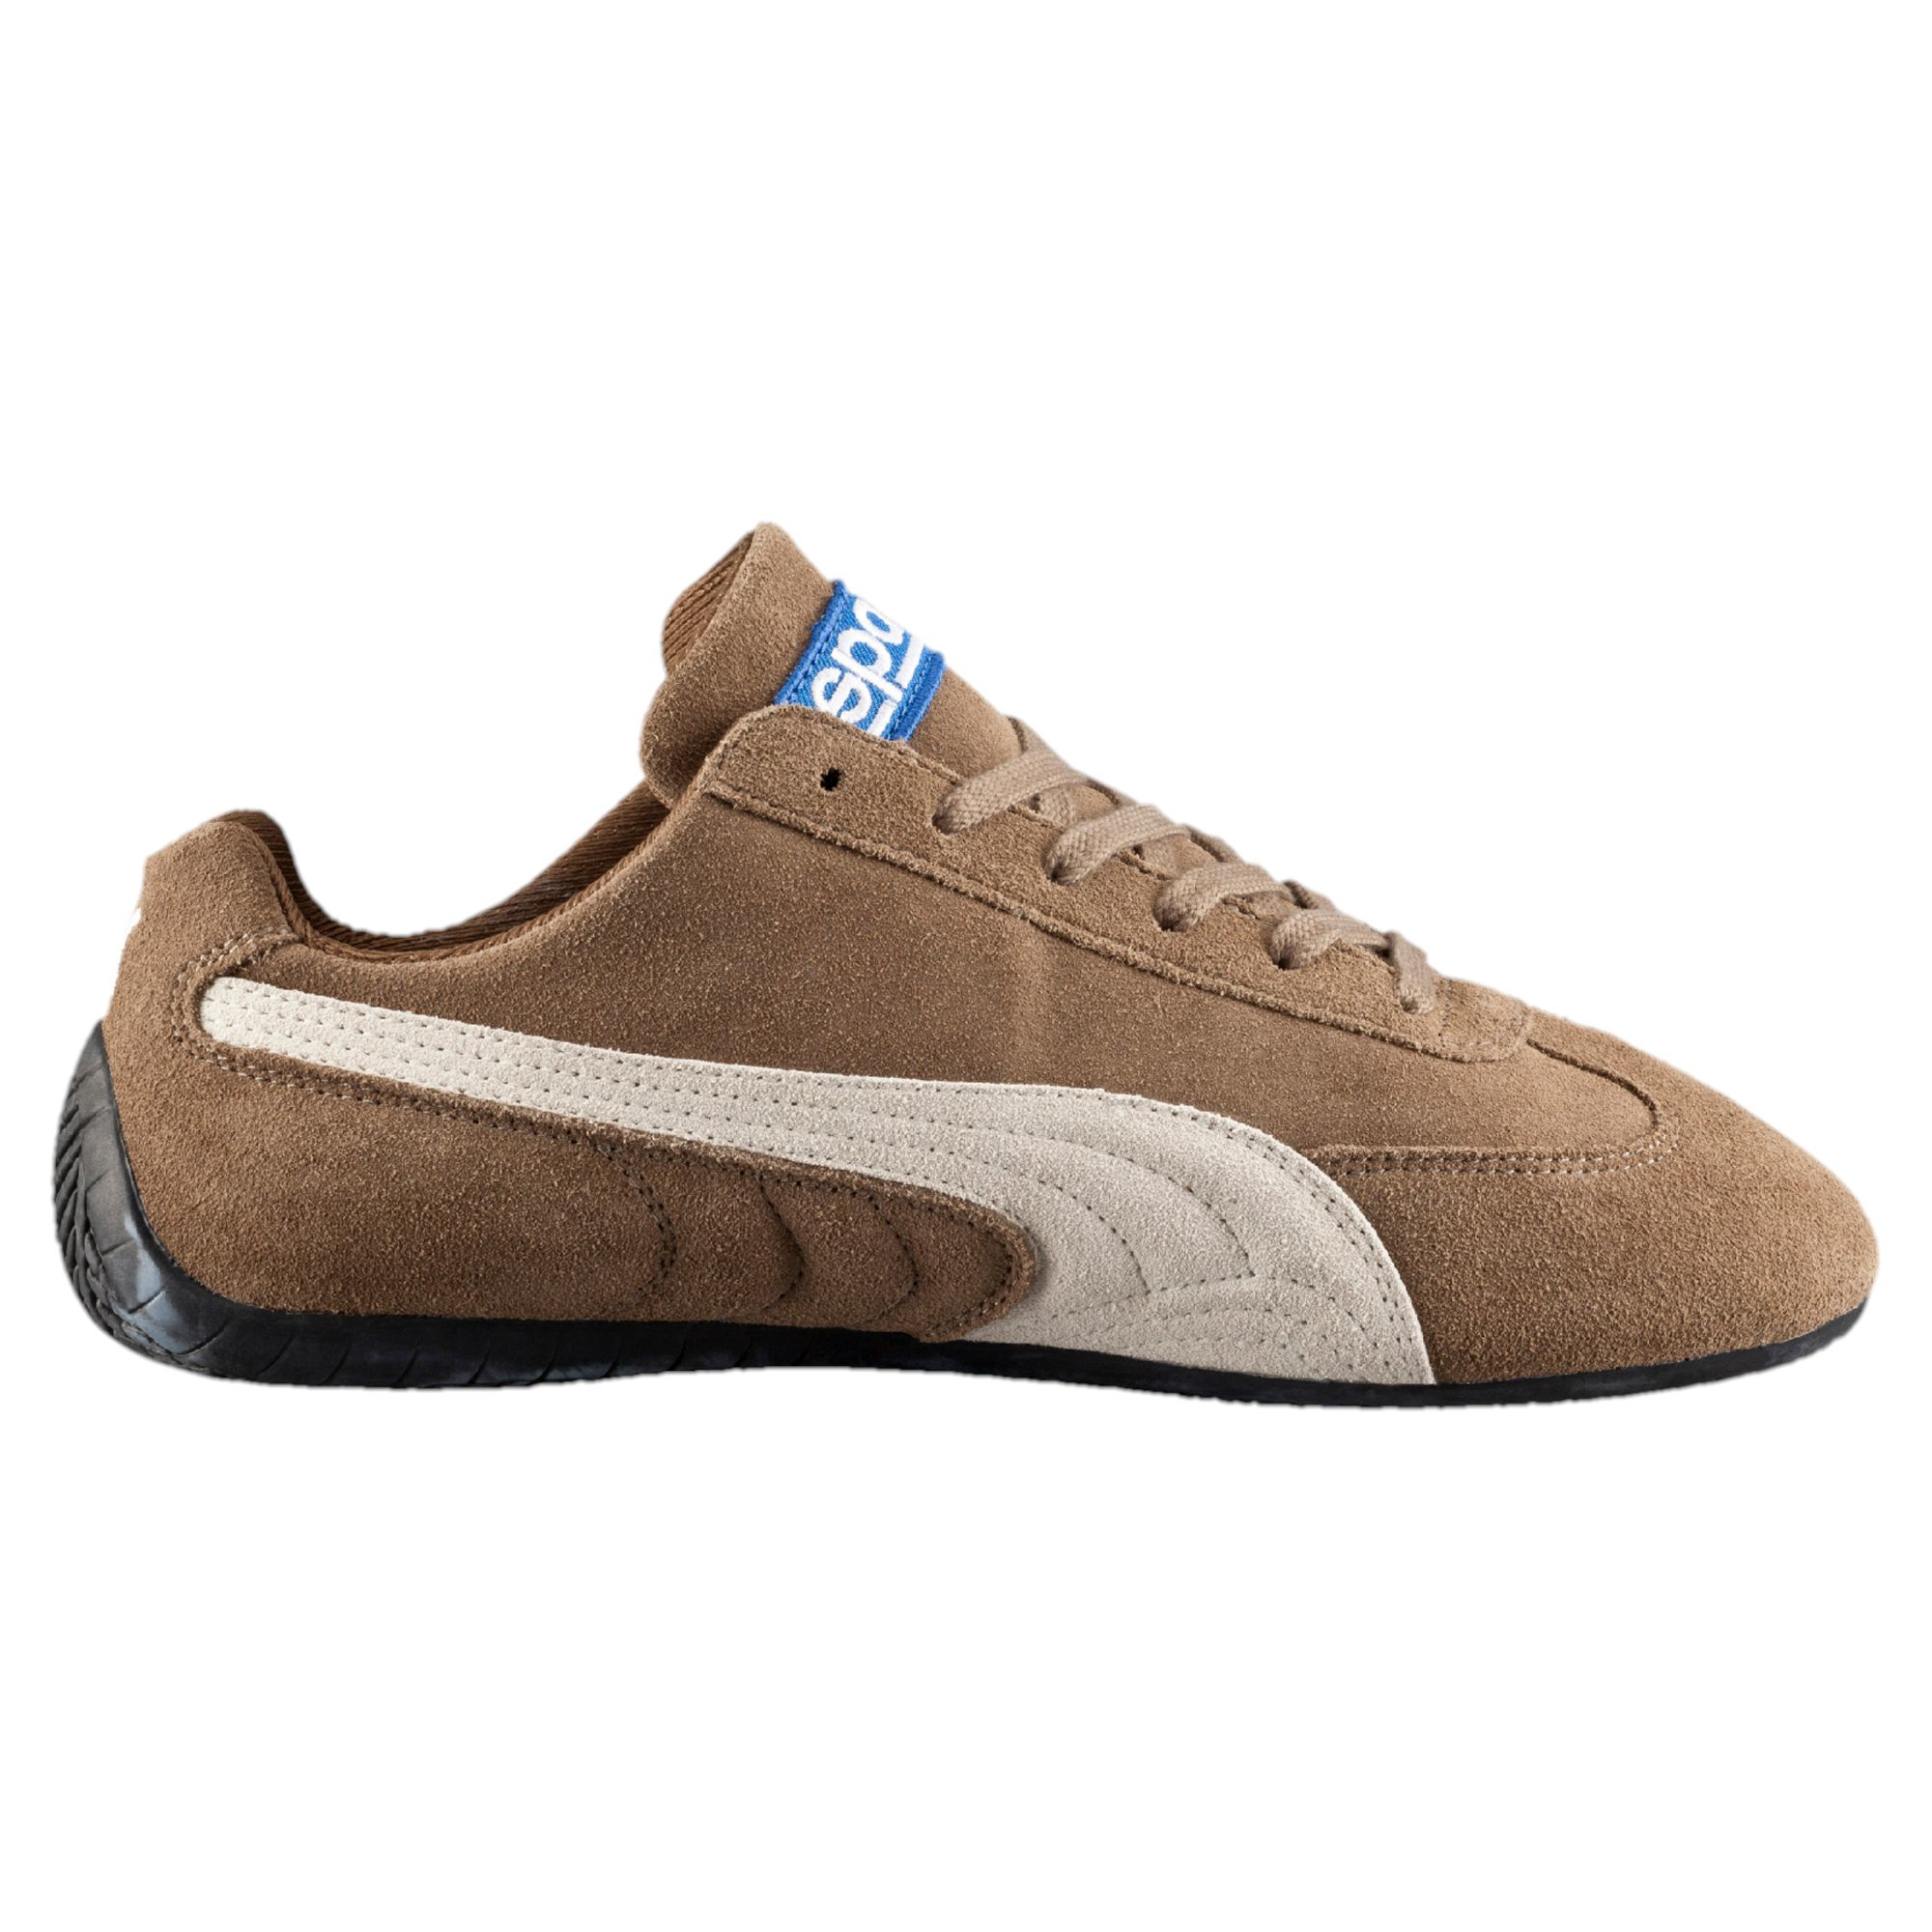 PUMA Suede Speed Cat Shoes in Natural for Men - Lyst